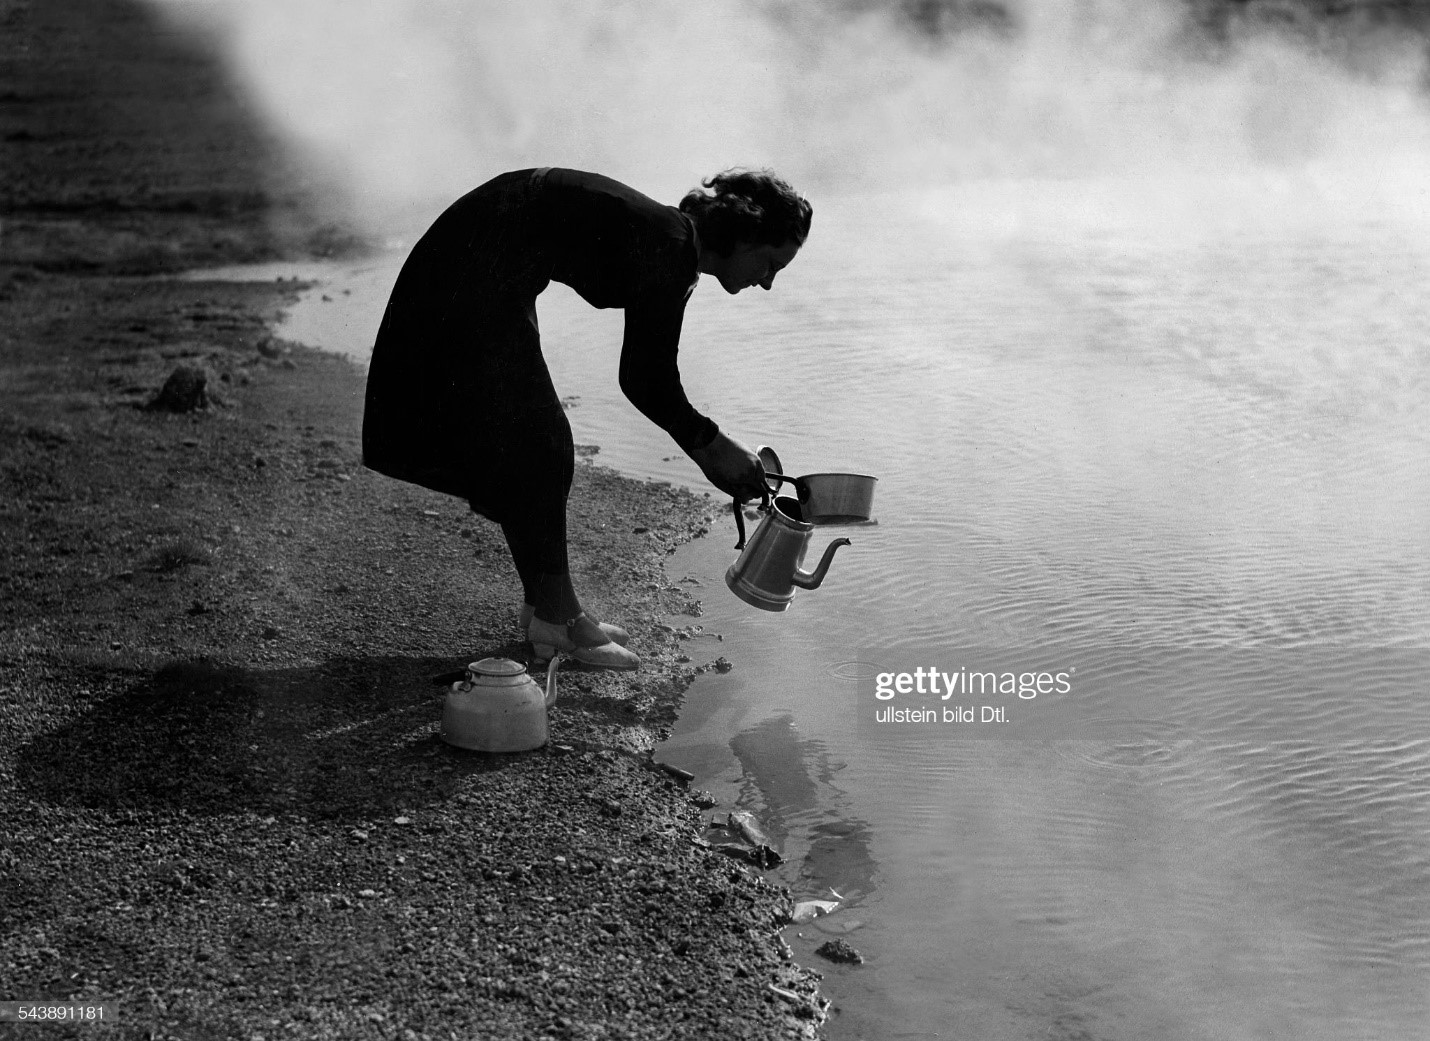 Icelandic woman getting hot water for a tea or coffee near by a geyser in 1935. 